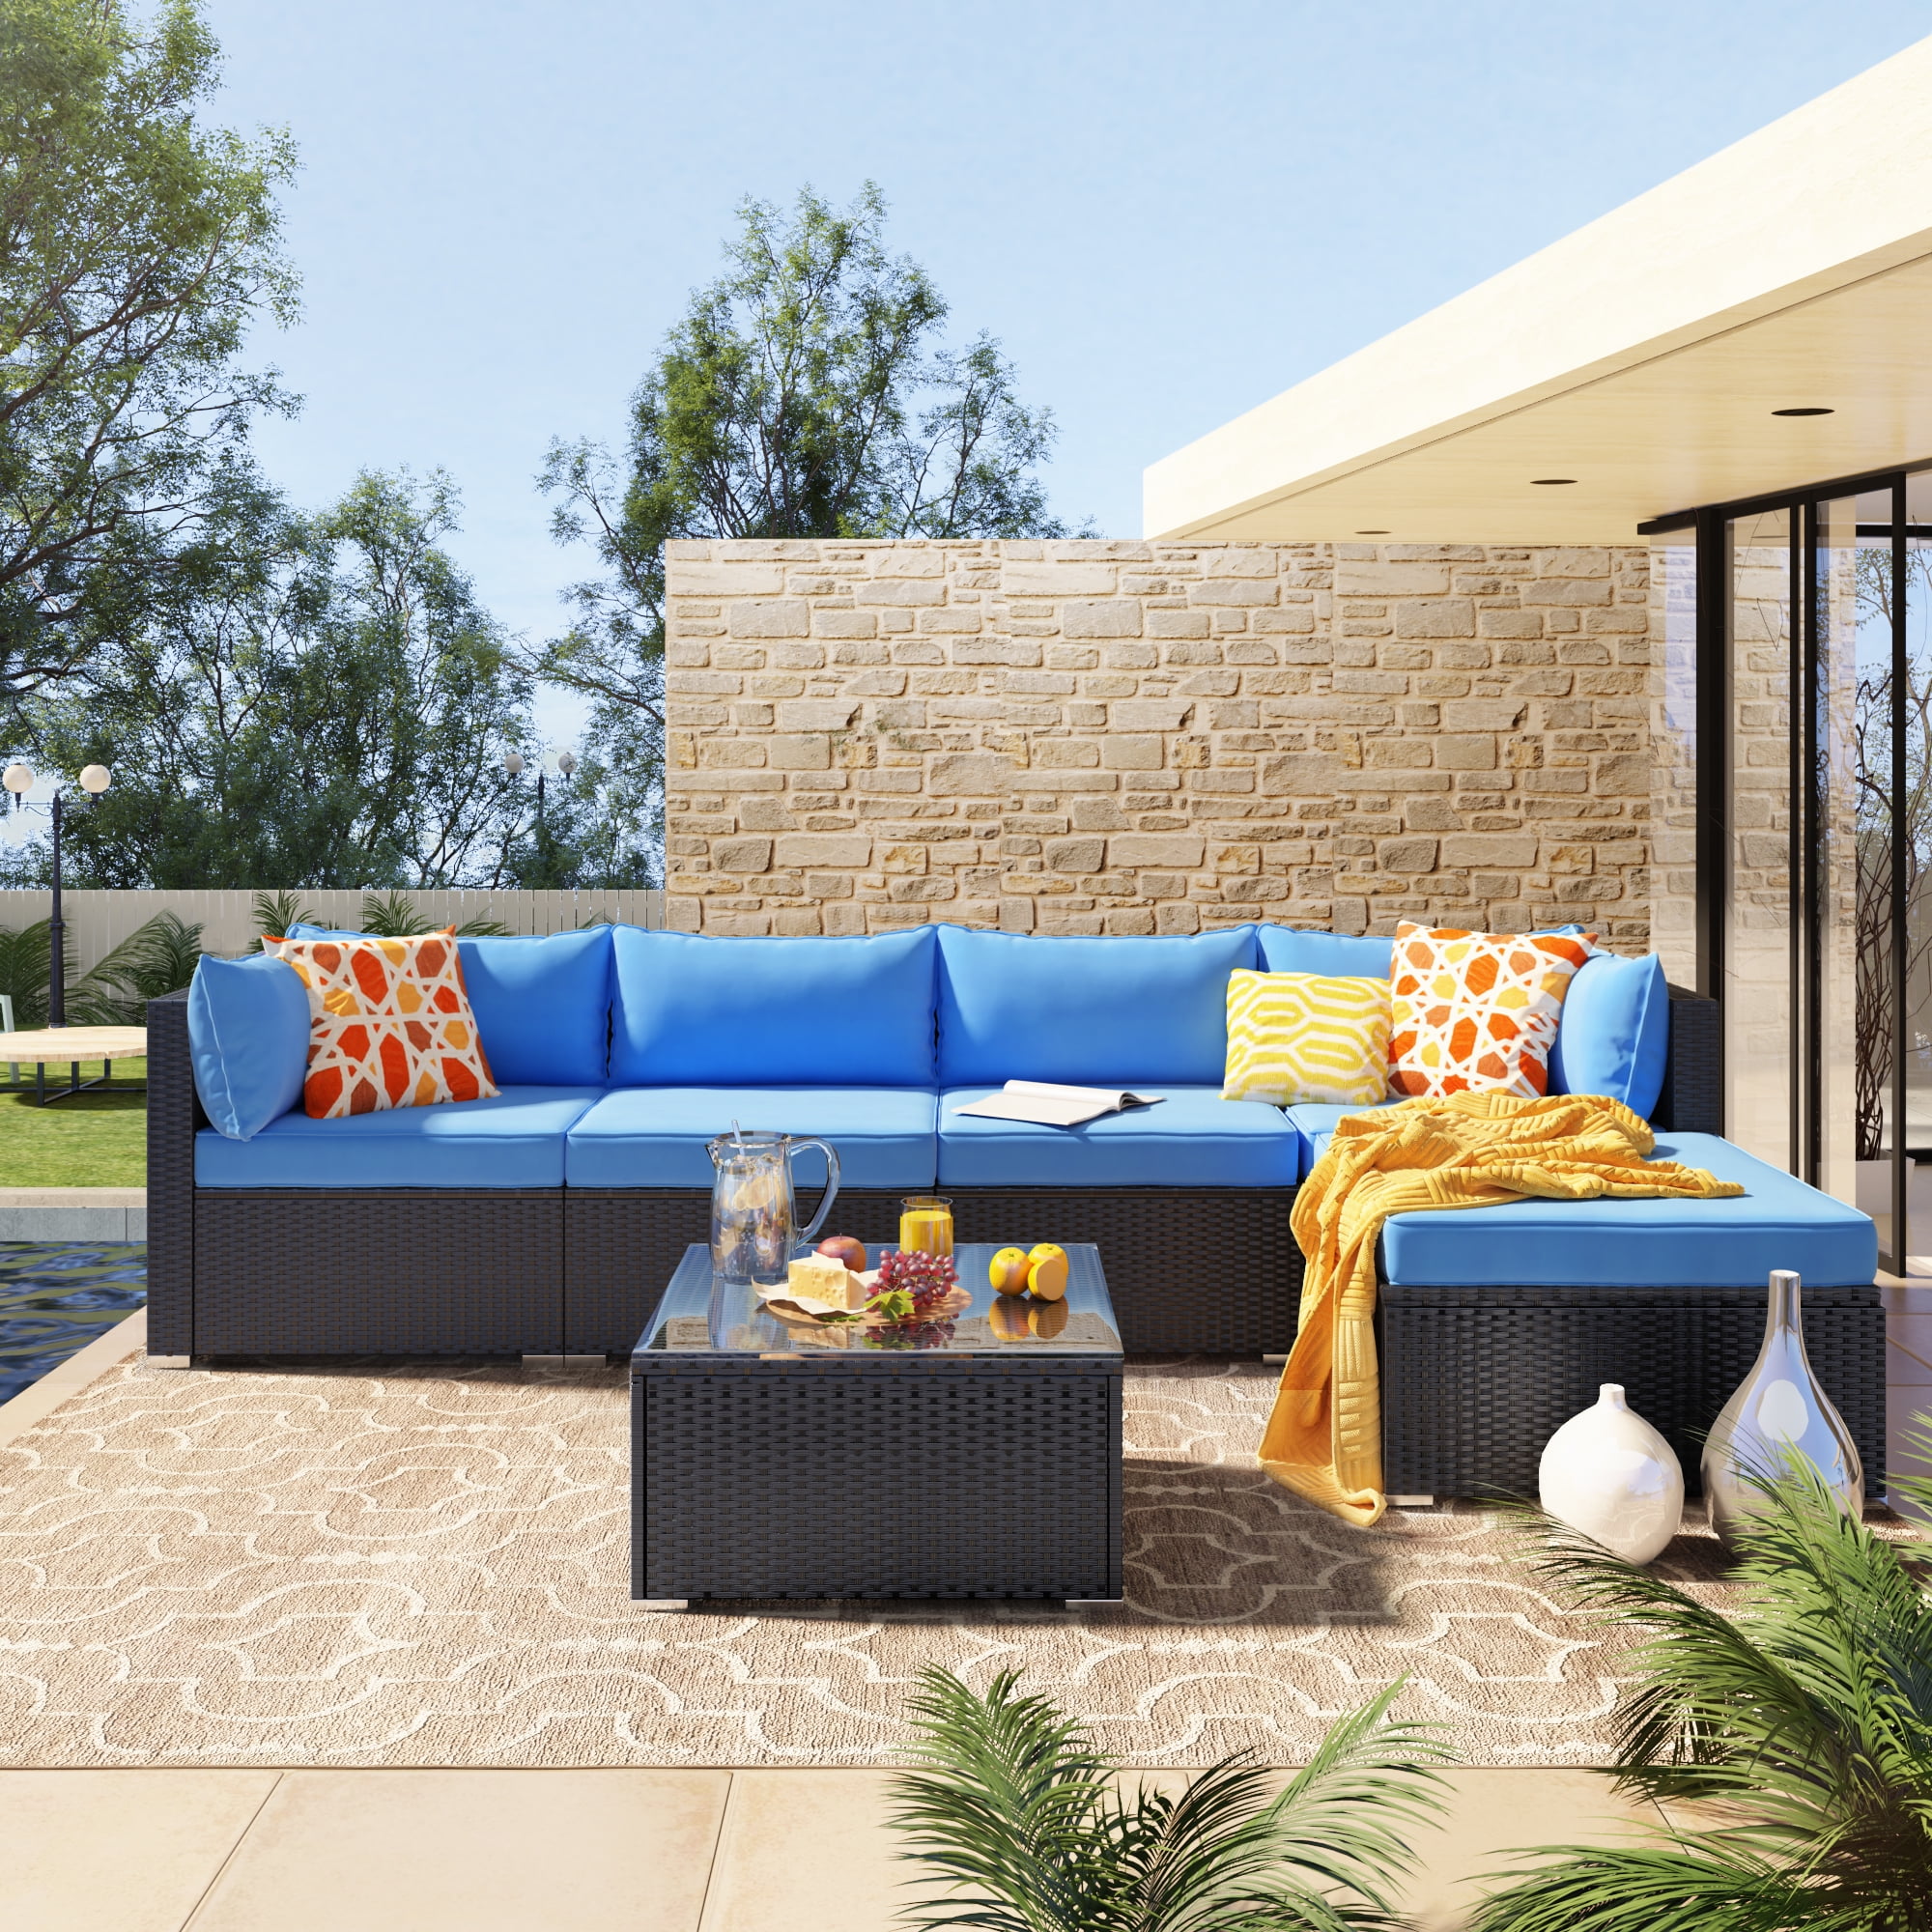 Red Outdoor All-Weather PE Rattan Wicker Lawn Conversation Sets Vitesse 7 Pieces Patio Furniture Sectional Sets Garden Sofa Set with Coffee Table and Washable Couch Cushions 